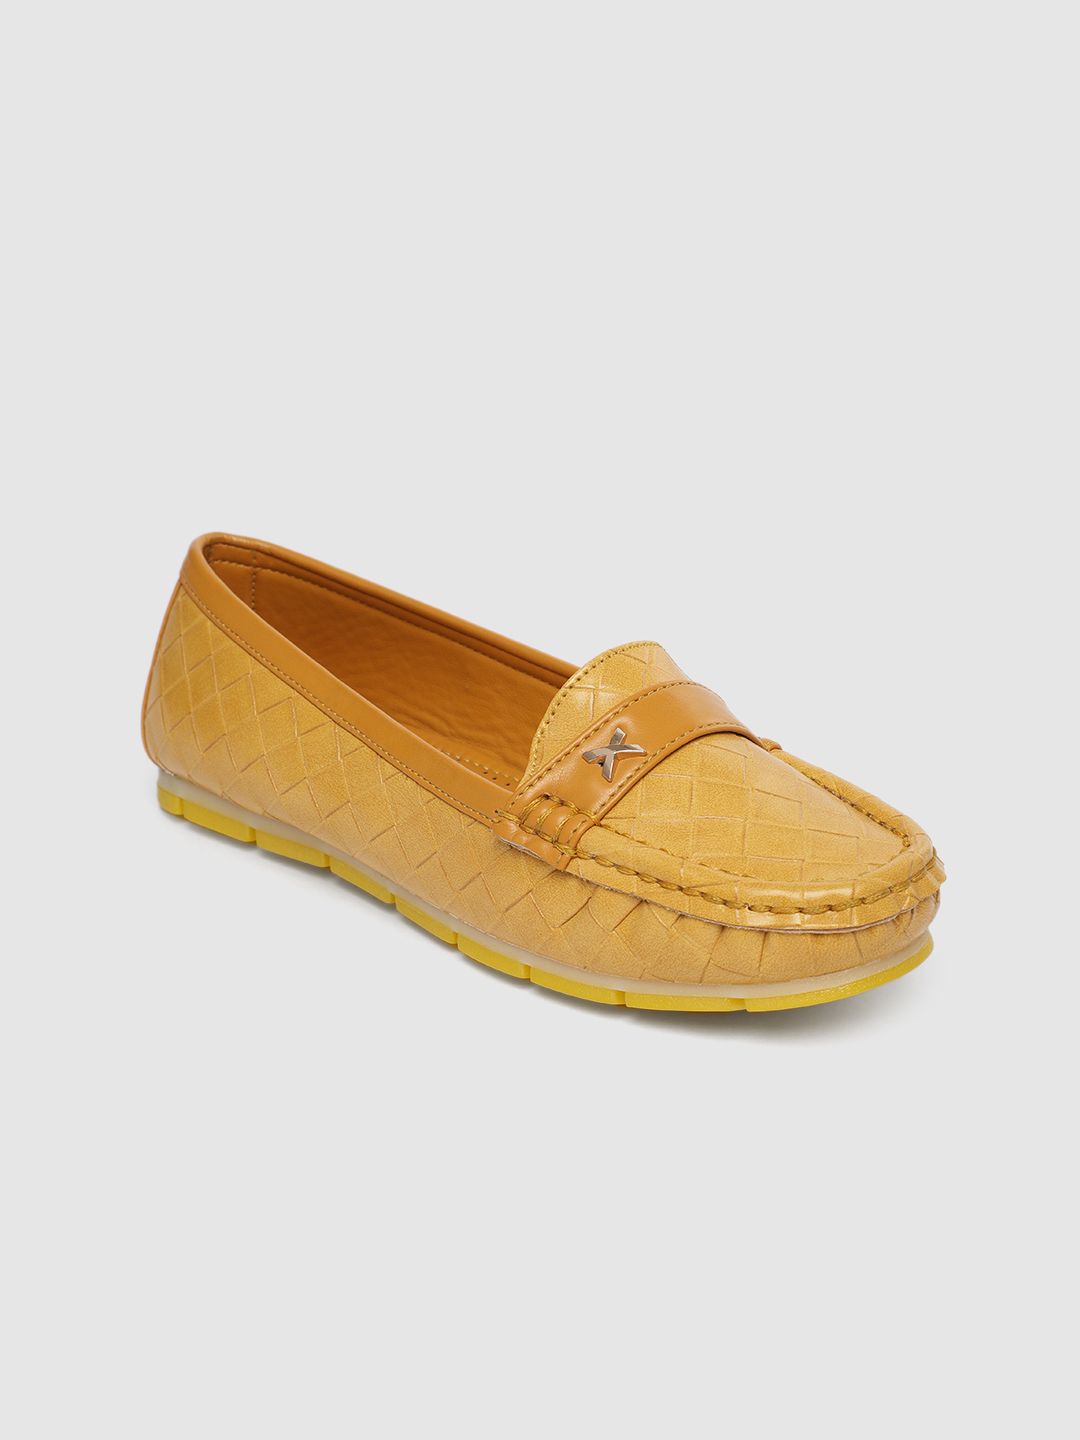 Inc 5 Women Mustard Yellow Textured Loafers Price in India